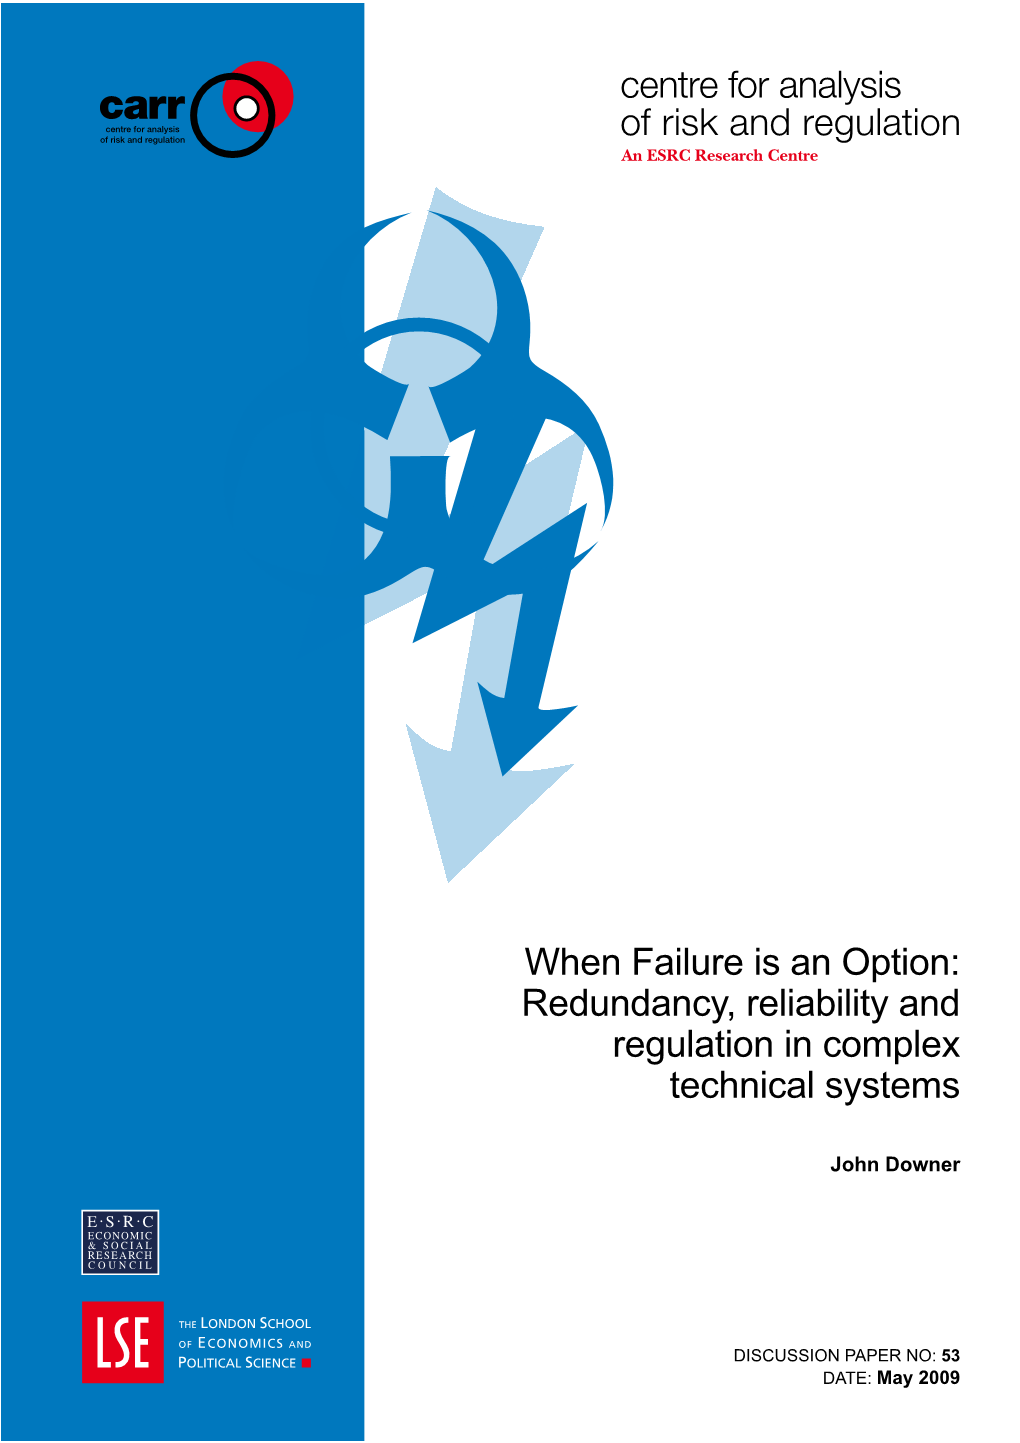 Redundancy, Reliability and Regulation in Complex Technical Systems